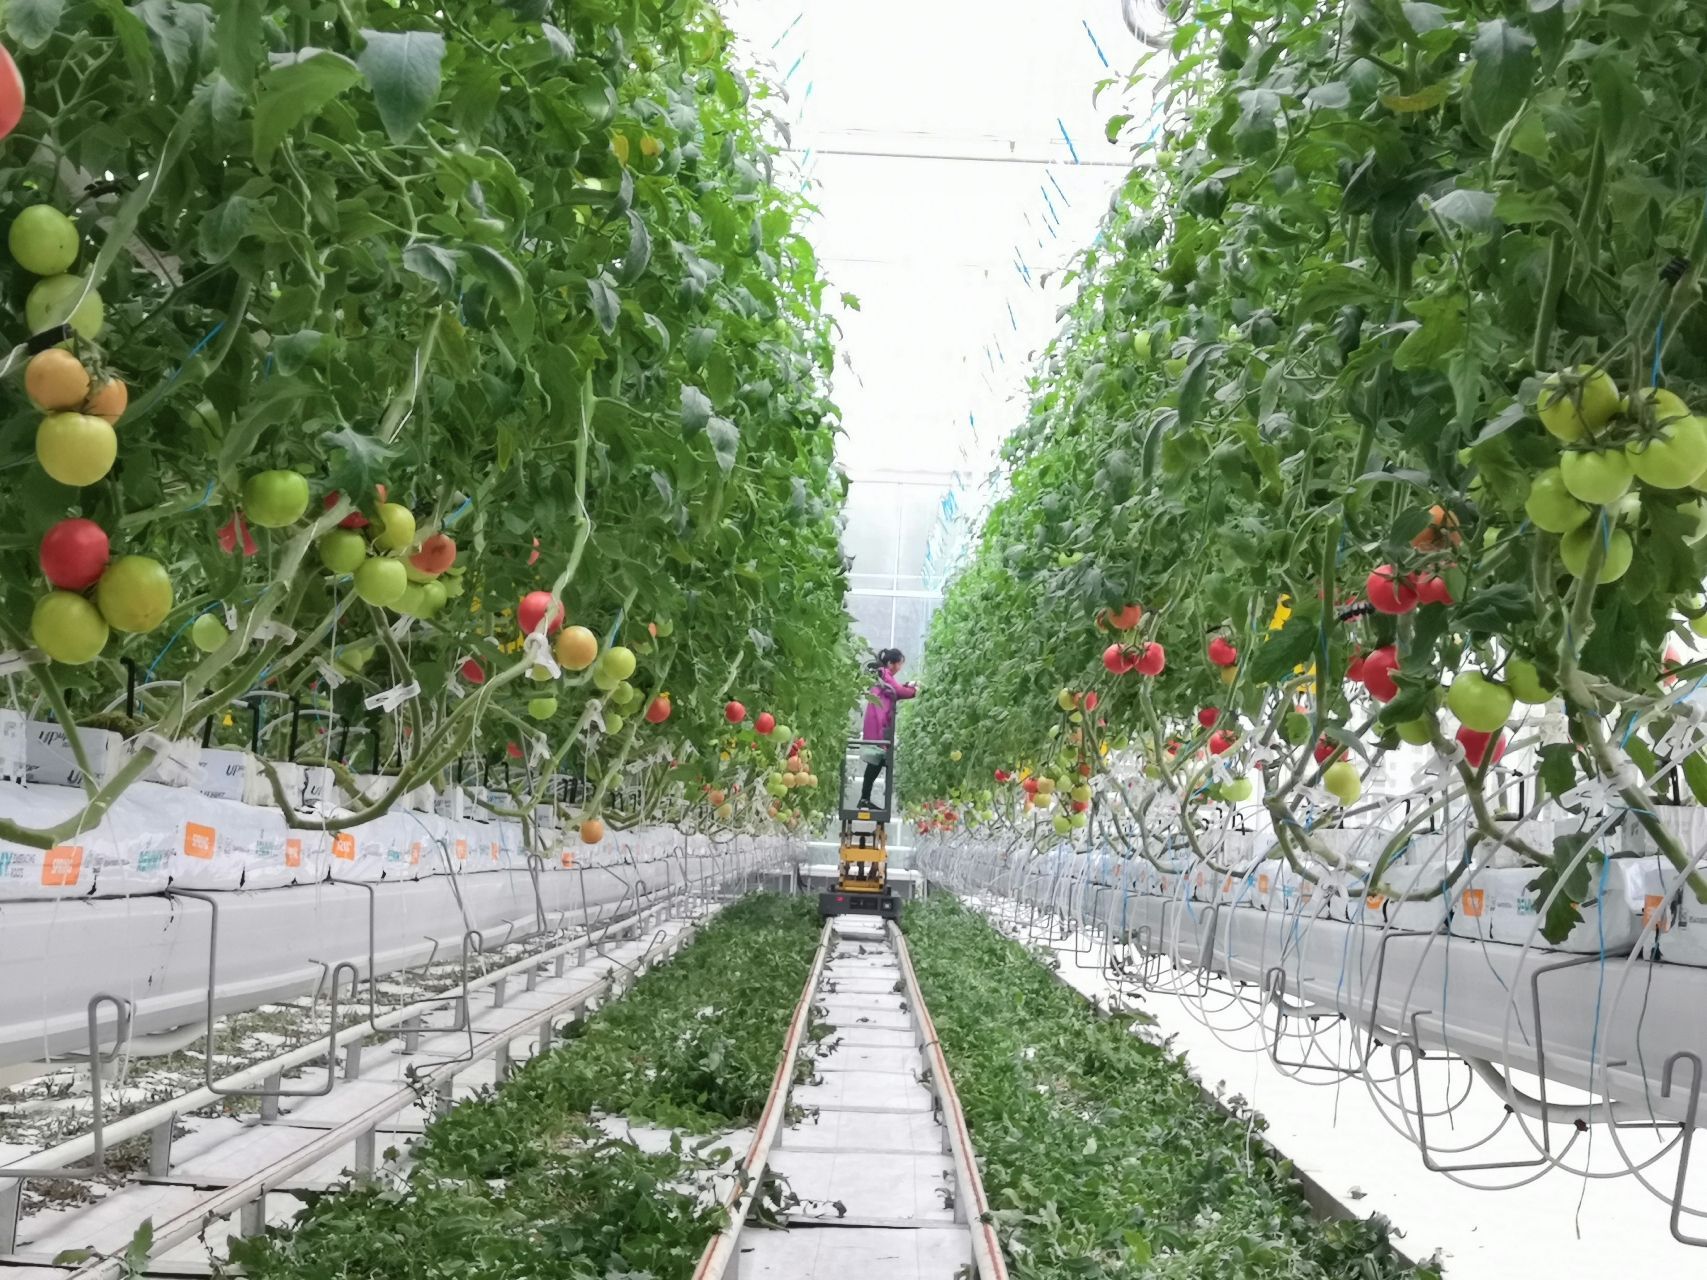 Choosing the right tomato variety:The key to greenhouse growing